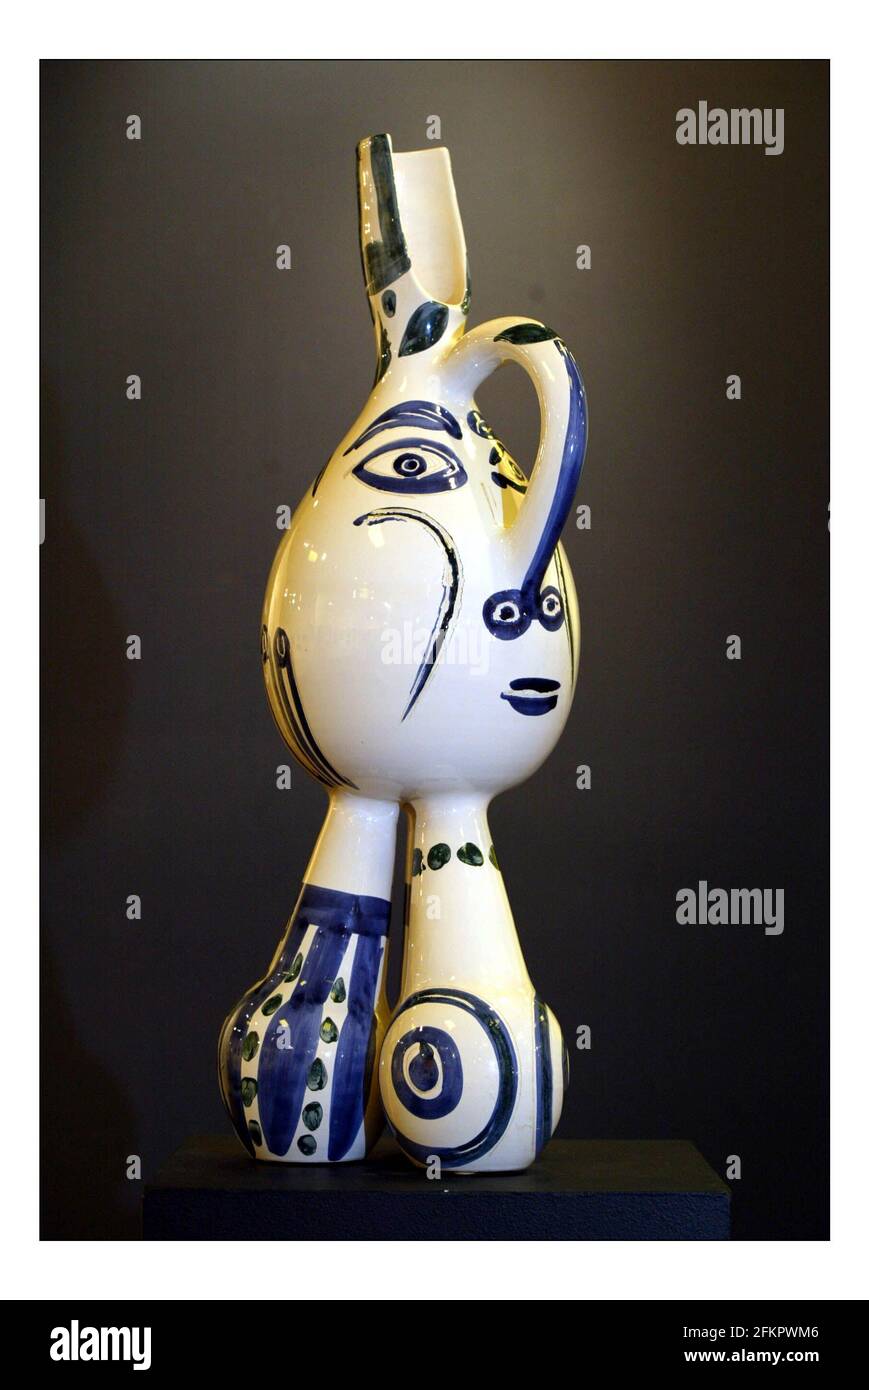 Ceramics by Pablo Picasso to be auctioned at Sothebys, Olympia in London, 12 October. Tripode (AR no 125)  28 000 - 35 000pic David Sandison 24/10/2005 Stock Photo